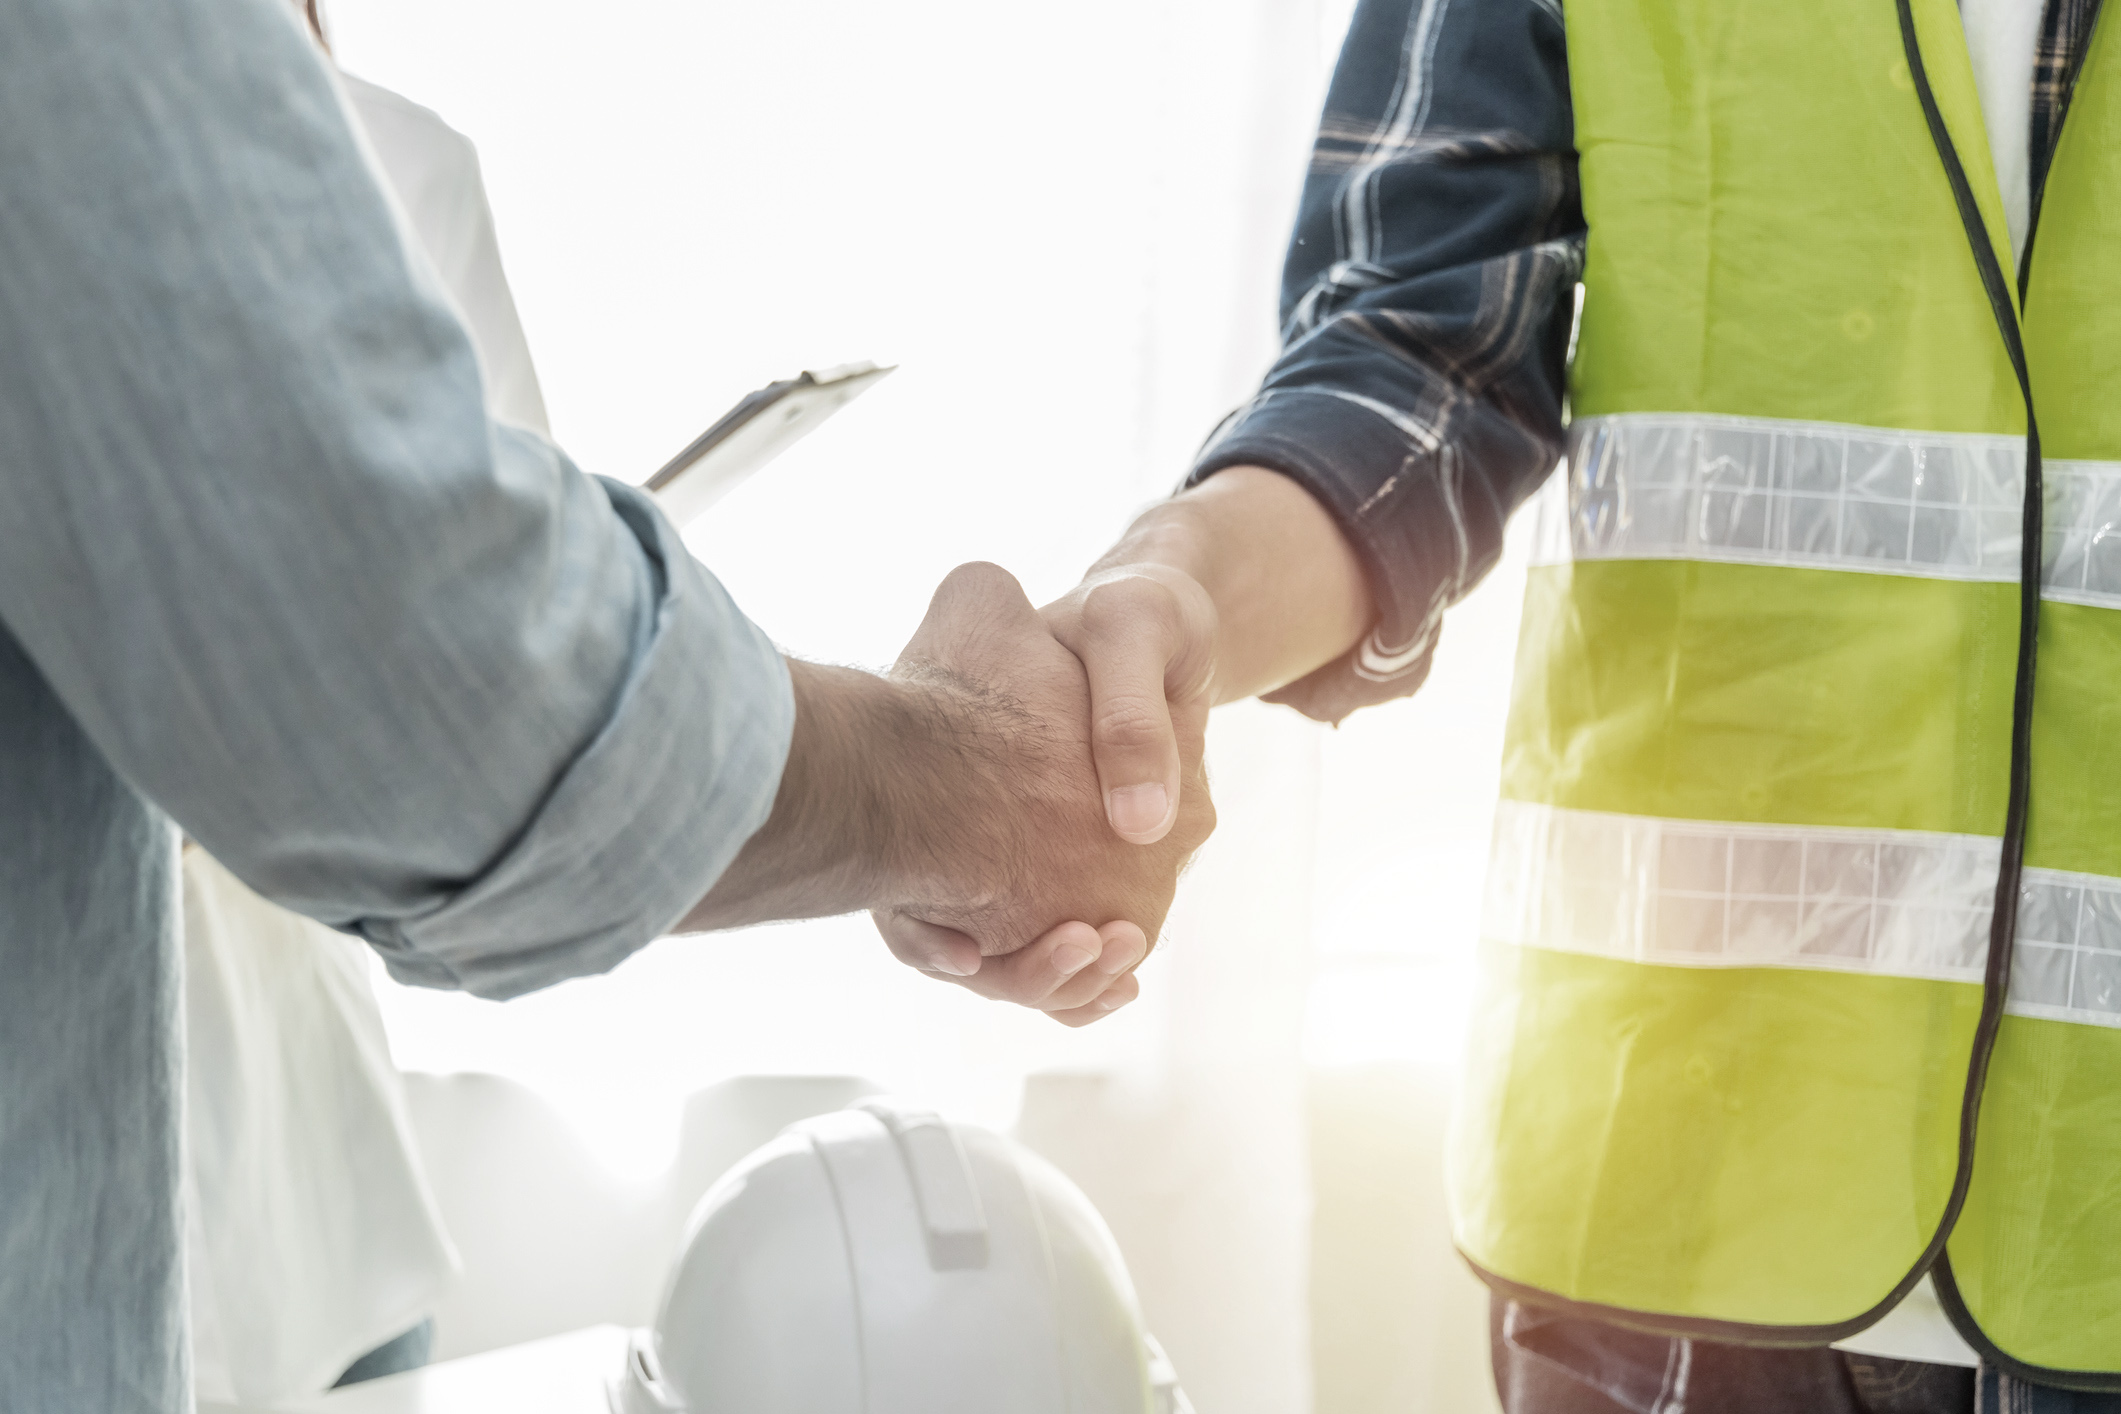 contractor-construction-worker-team-hands-shaking-after-plan-project-contract-on-workplace-desk-in-meeting-room-office-at-construction-site-contractor-engineering-partnership-construction-concept